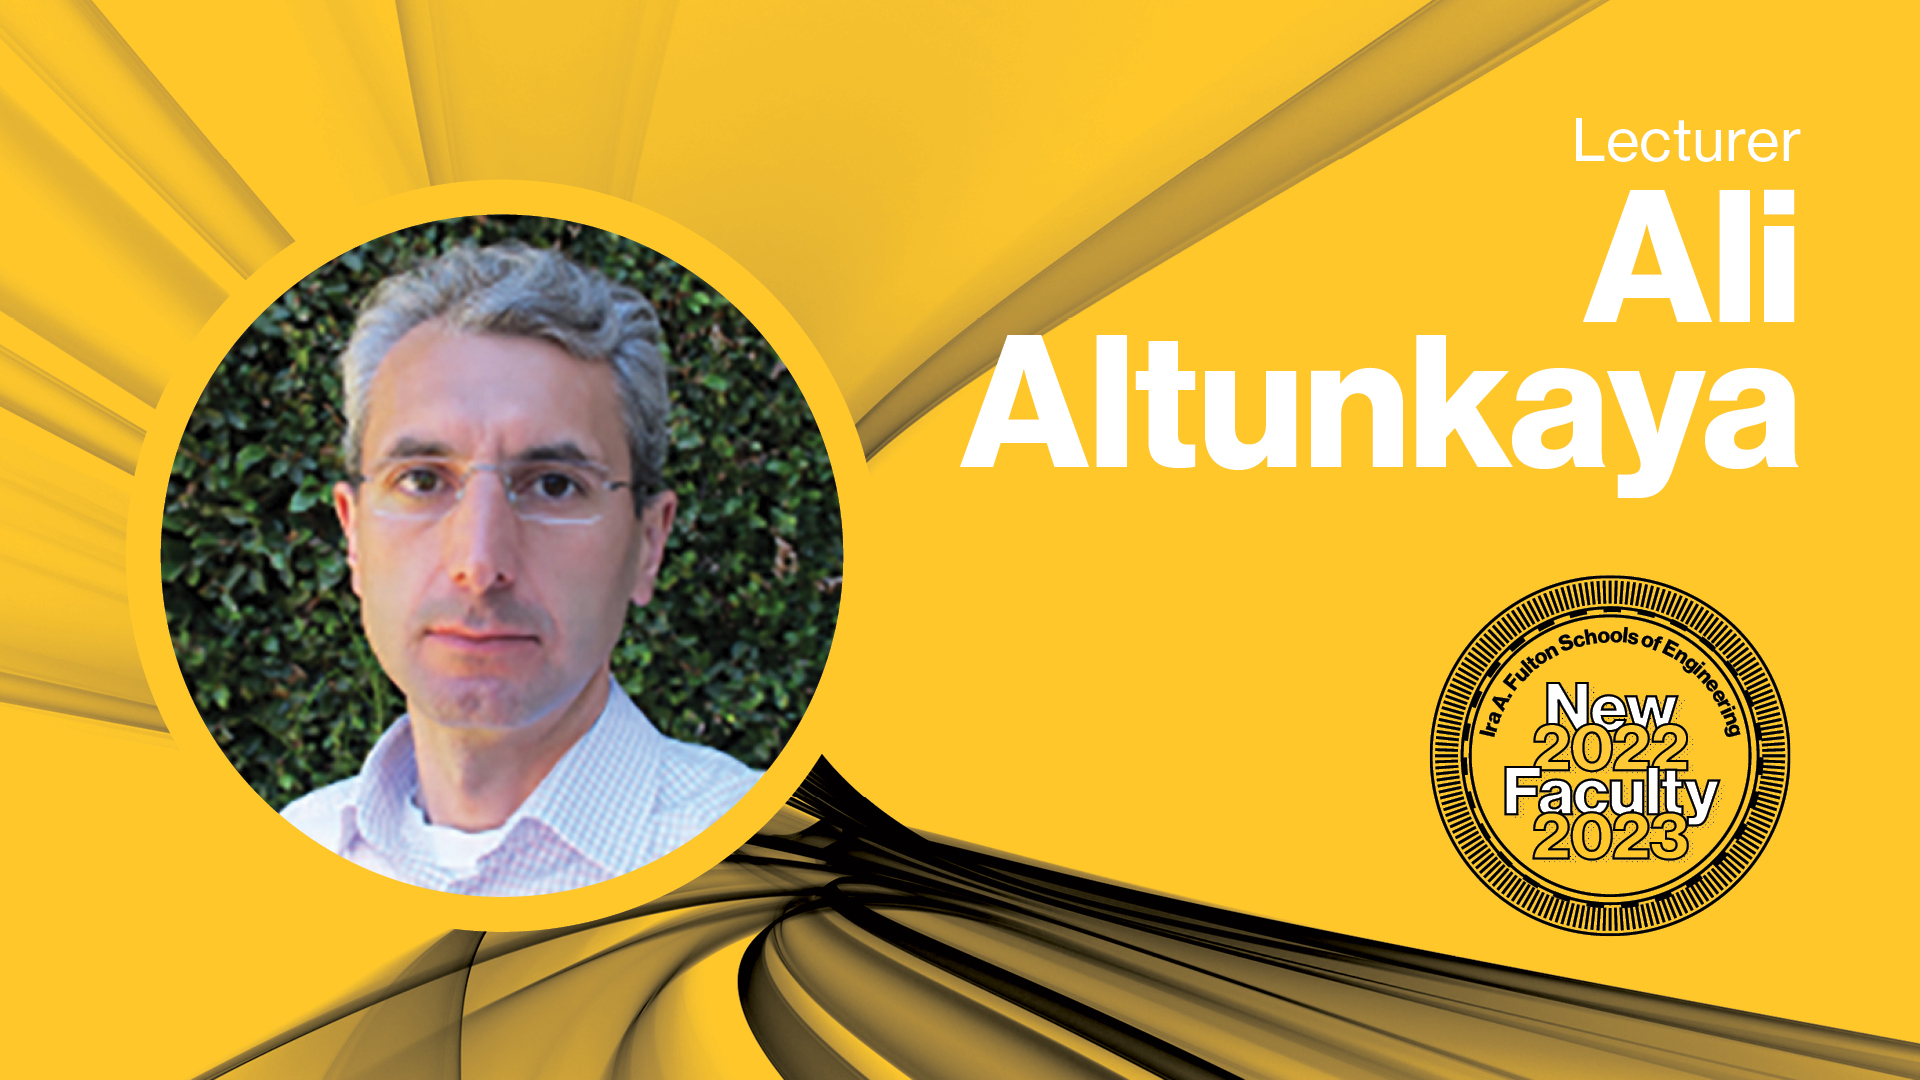 Lecturer Ali Altunkaya Ira A. Fulton Schools of Engineering New Faculty 2022-2023 with a headshot